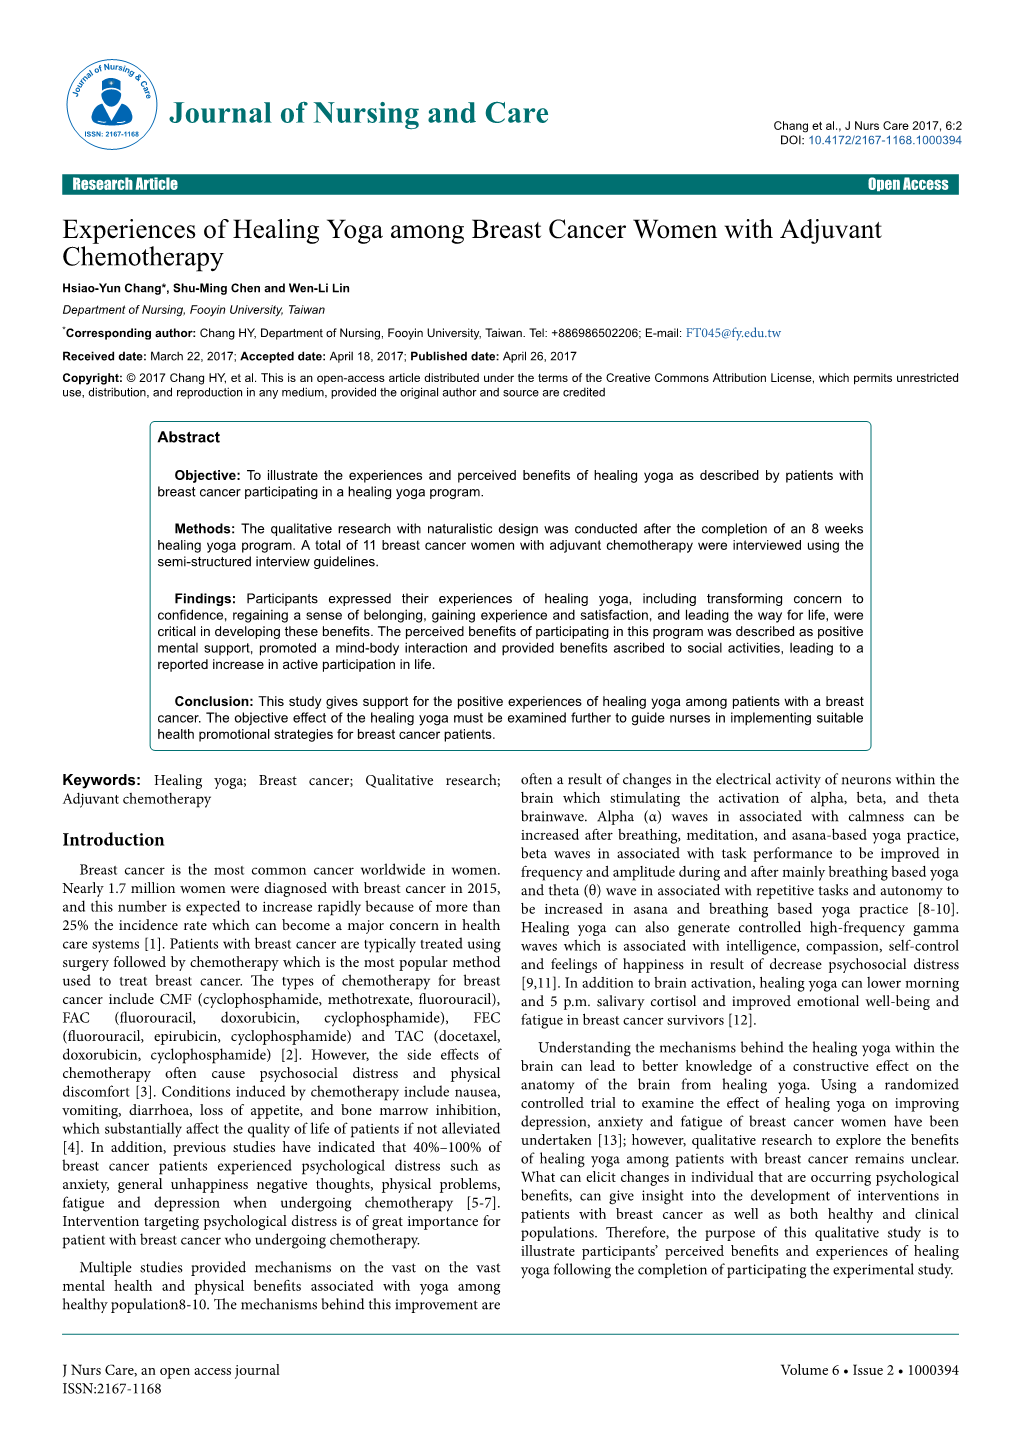 Experiences of Healing Yoga Among Breast Cancer Women With